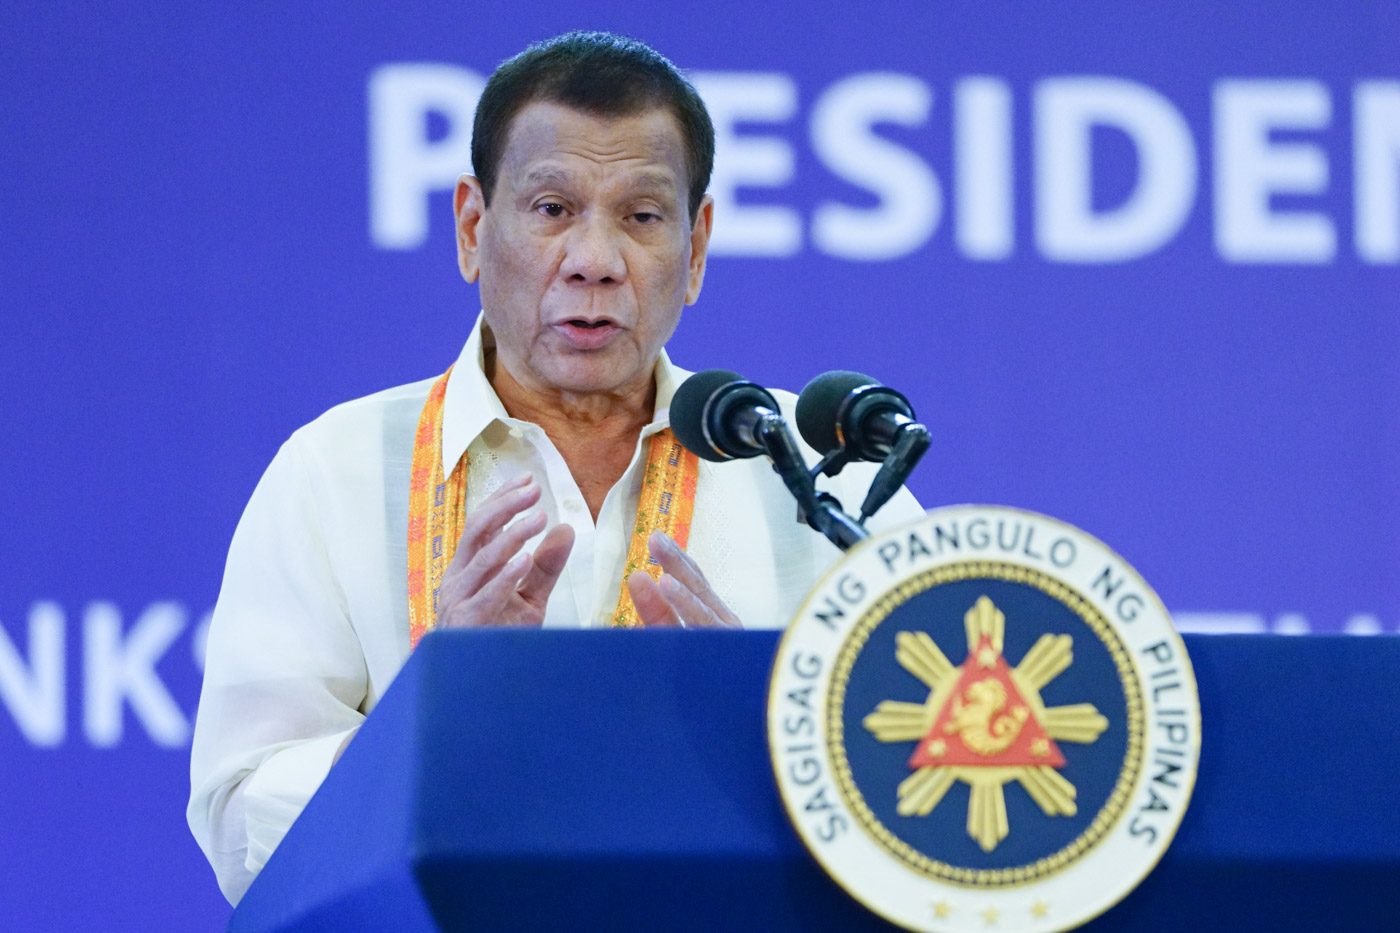 Duterte to axe DOH staff over health workers’ compensation but spares Duque